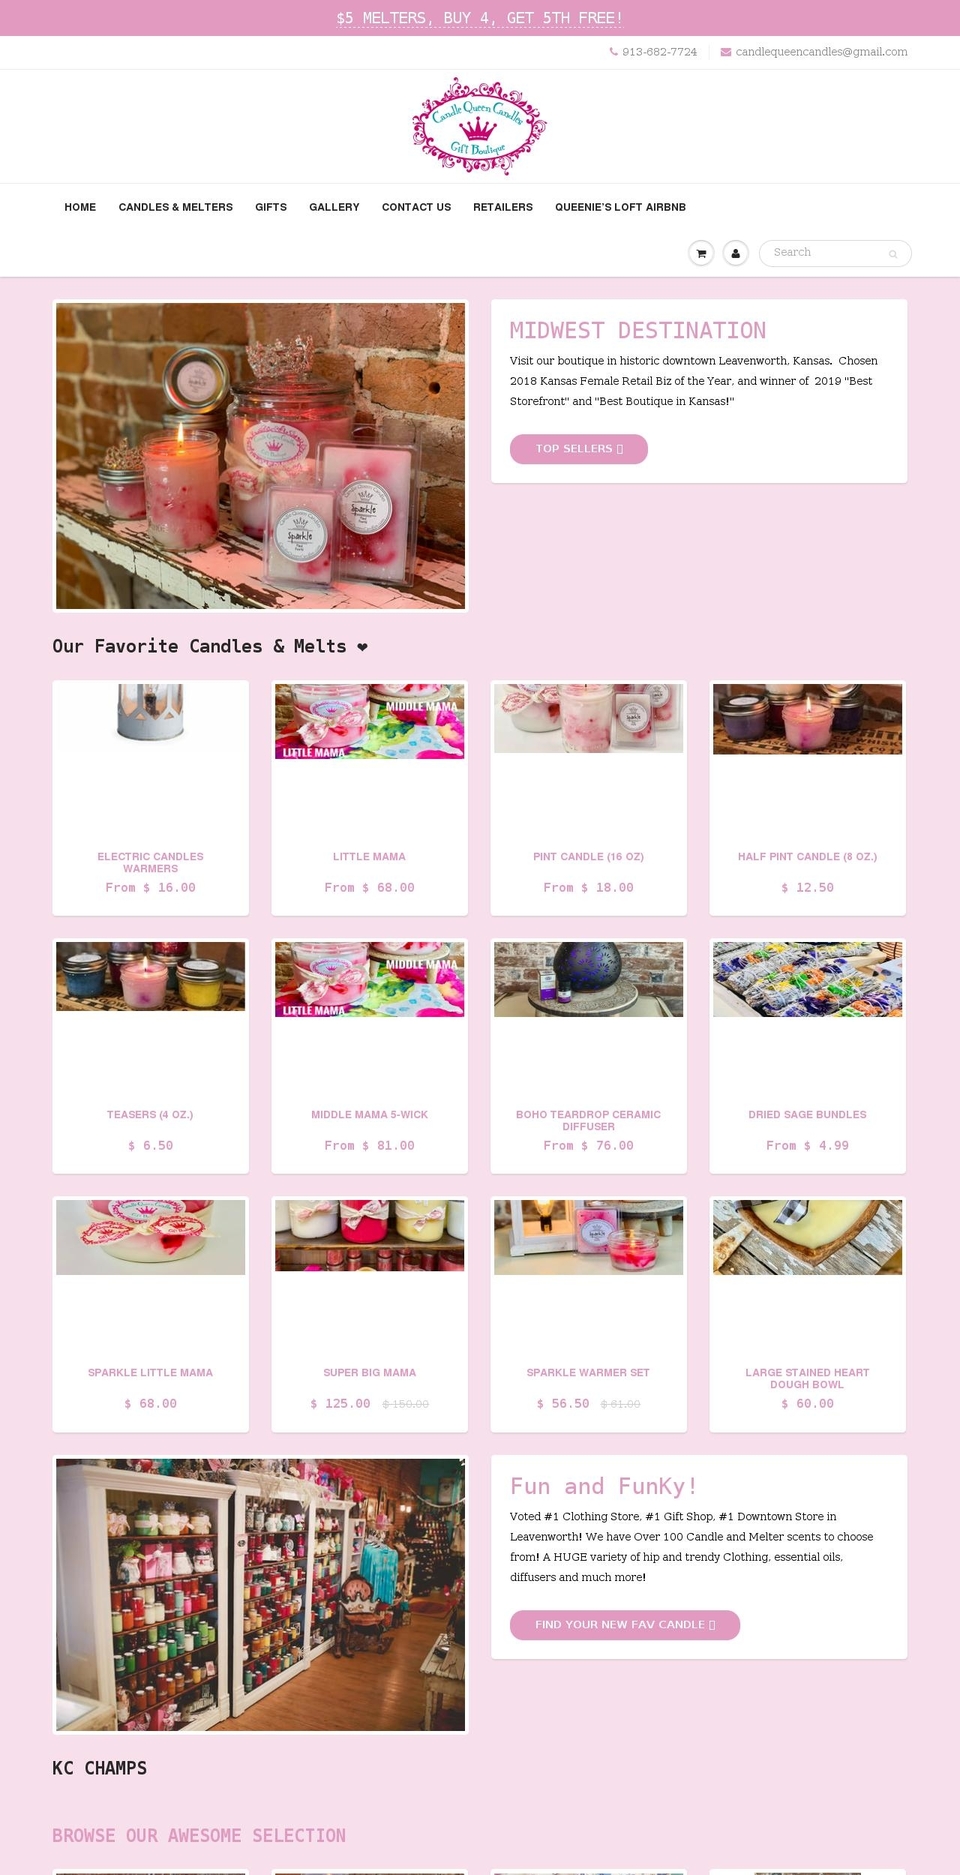 QUEEN Shopify theme site example candlequeencandles.com